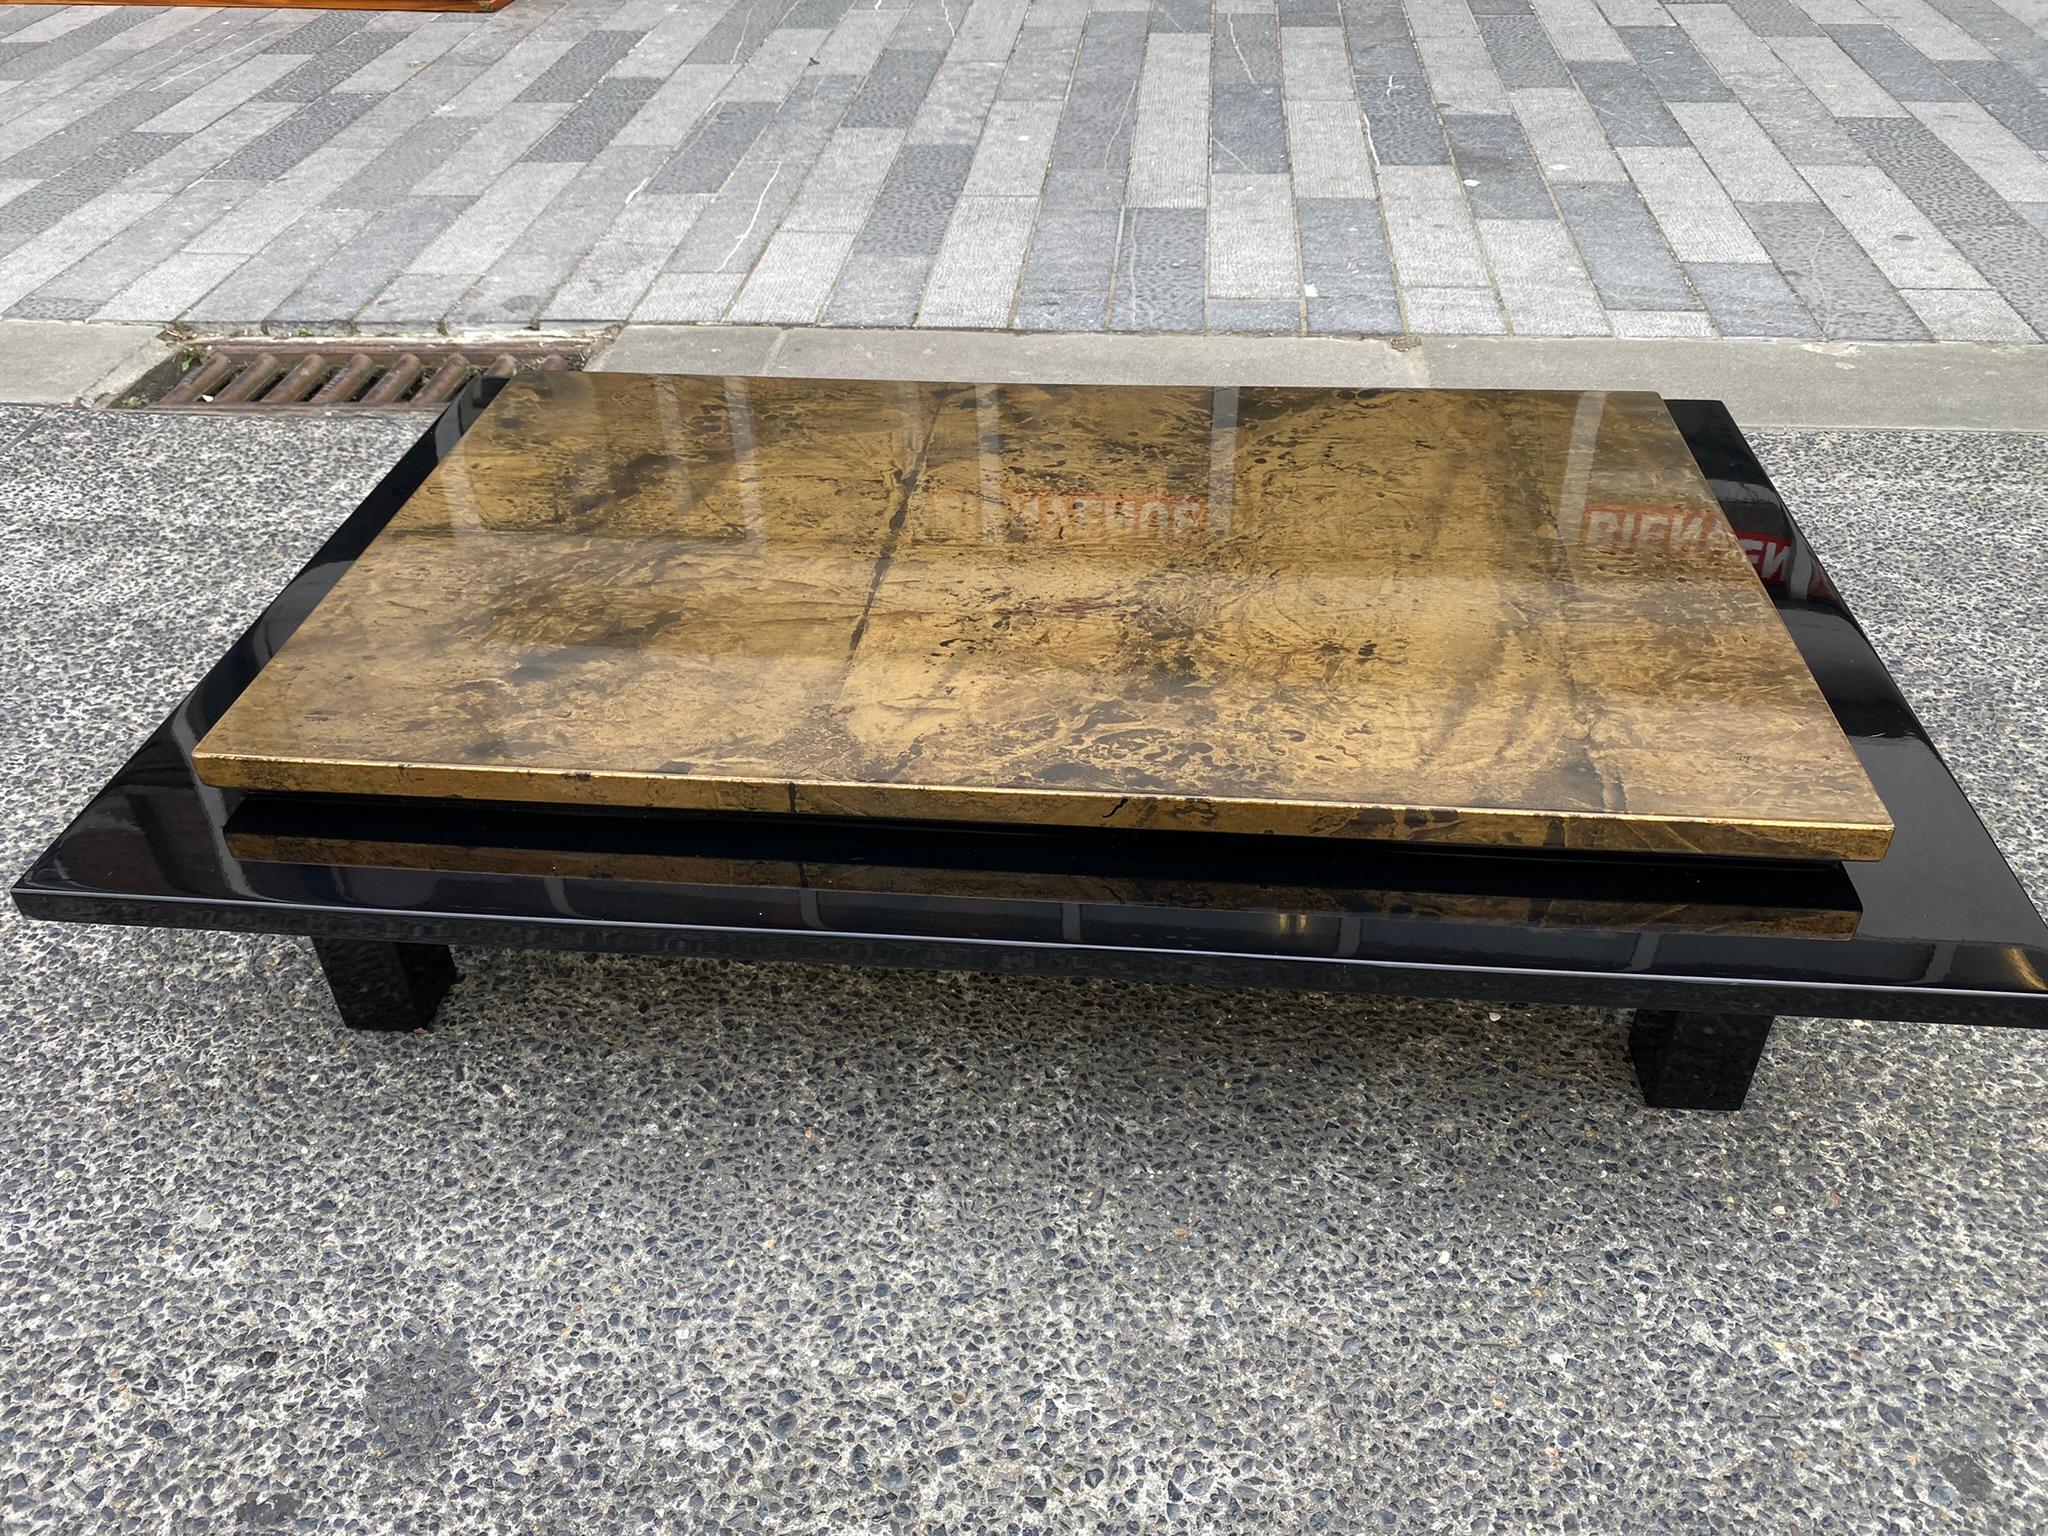 Guy Lefevre, large coffee table, Maison Jansen, circa 1970.
Very good condition, very small flaws.